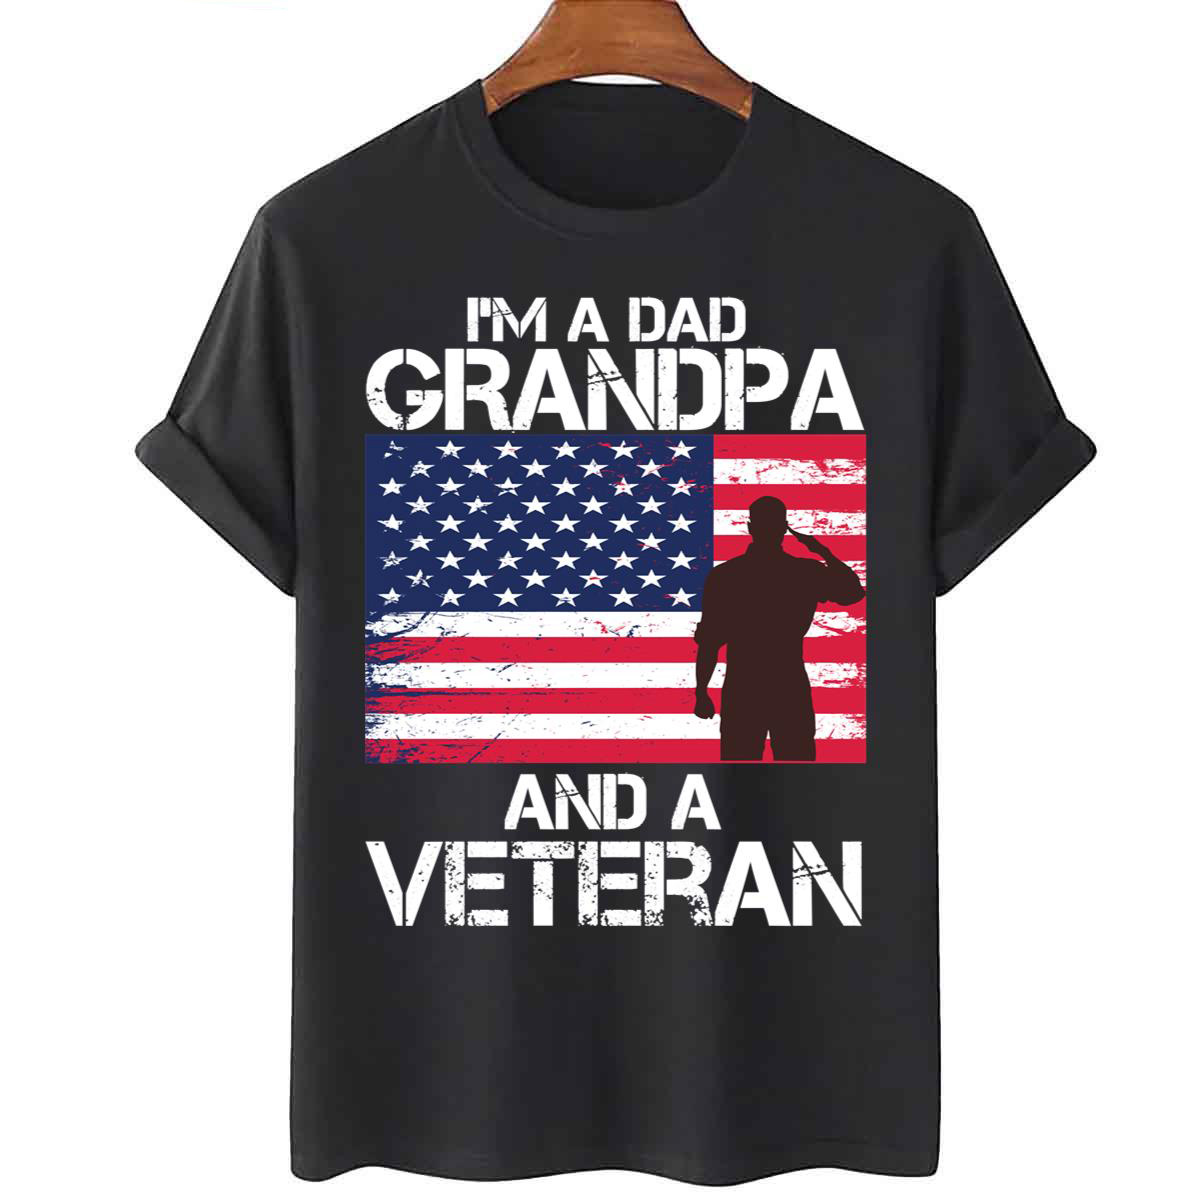 I'm A Dad Grandpa And A Veteran Nothing Scares Me Sweatshirt Father's Day Gift Veteran Dad Shirt Patriotic Veteran Shirt Funny Dad Shirt